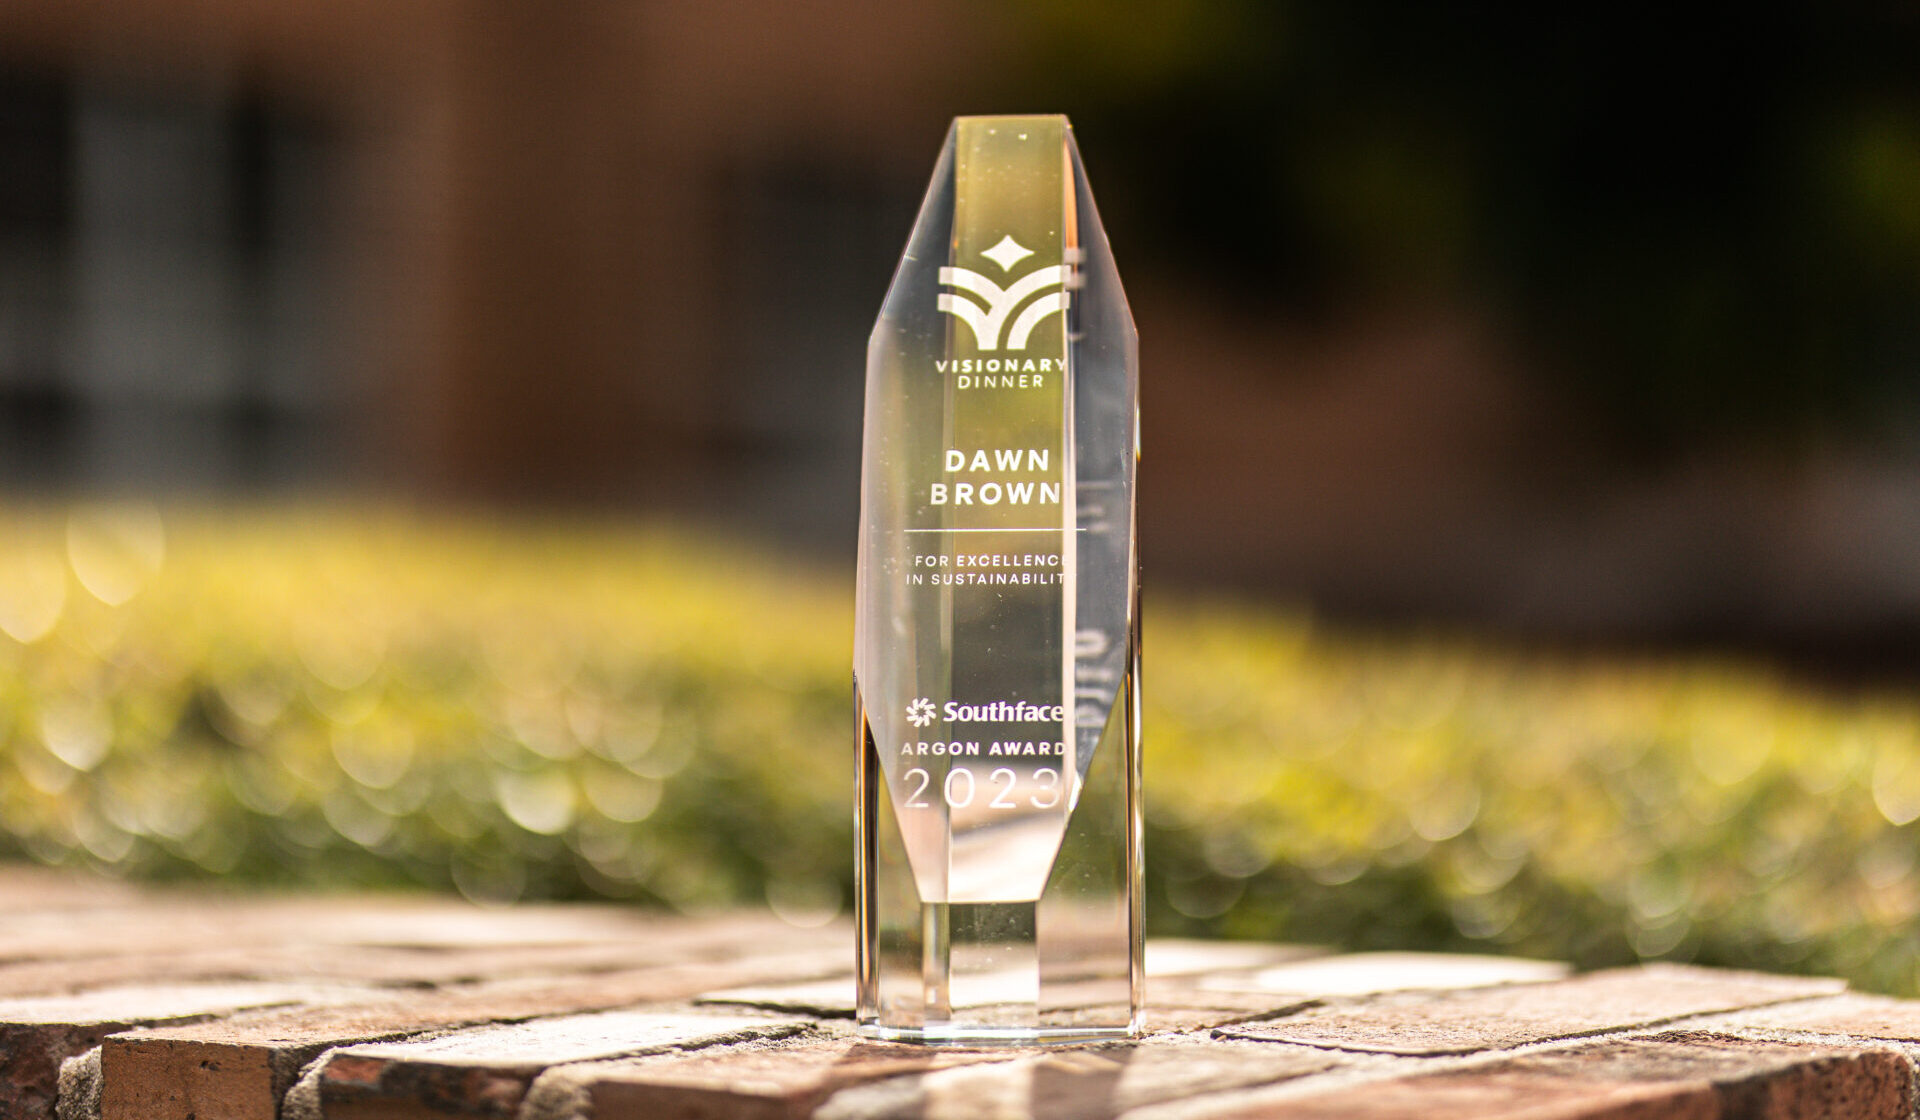 Southface’s 2023 Argon Award was presented at Visionary Dinner.